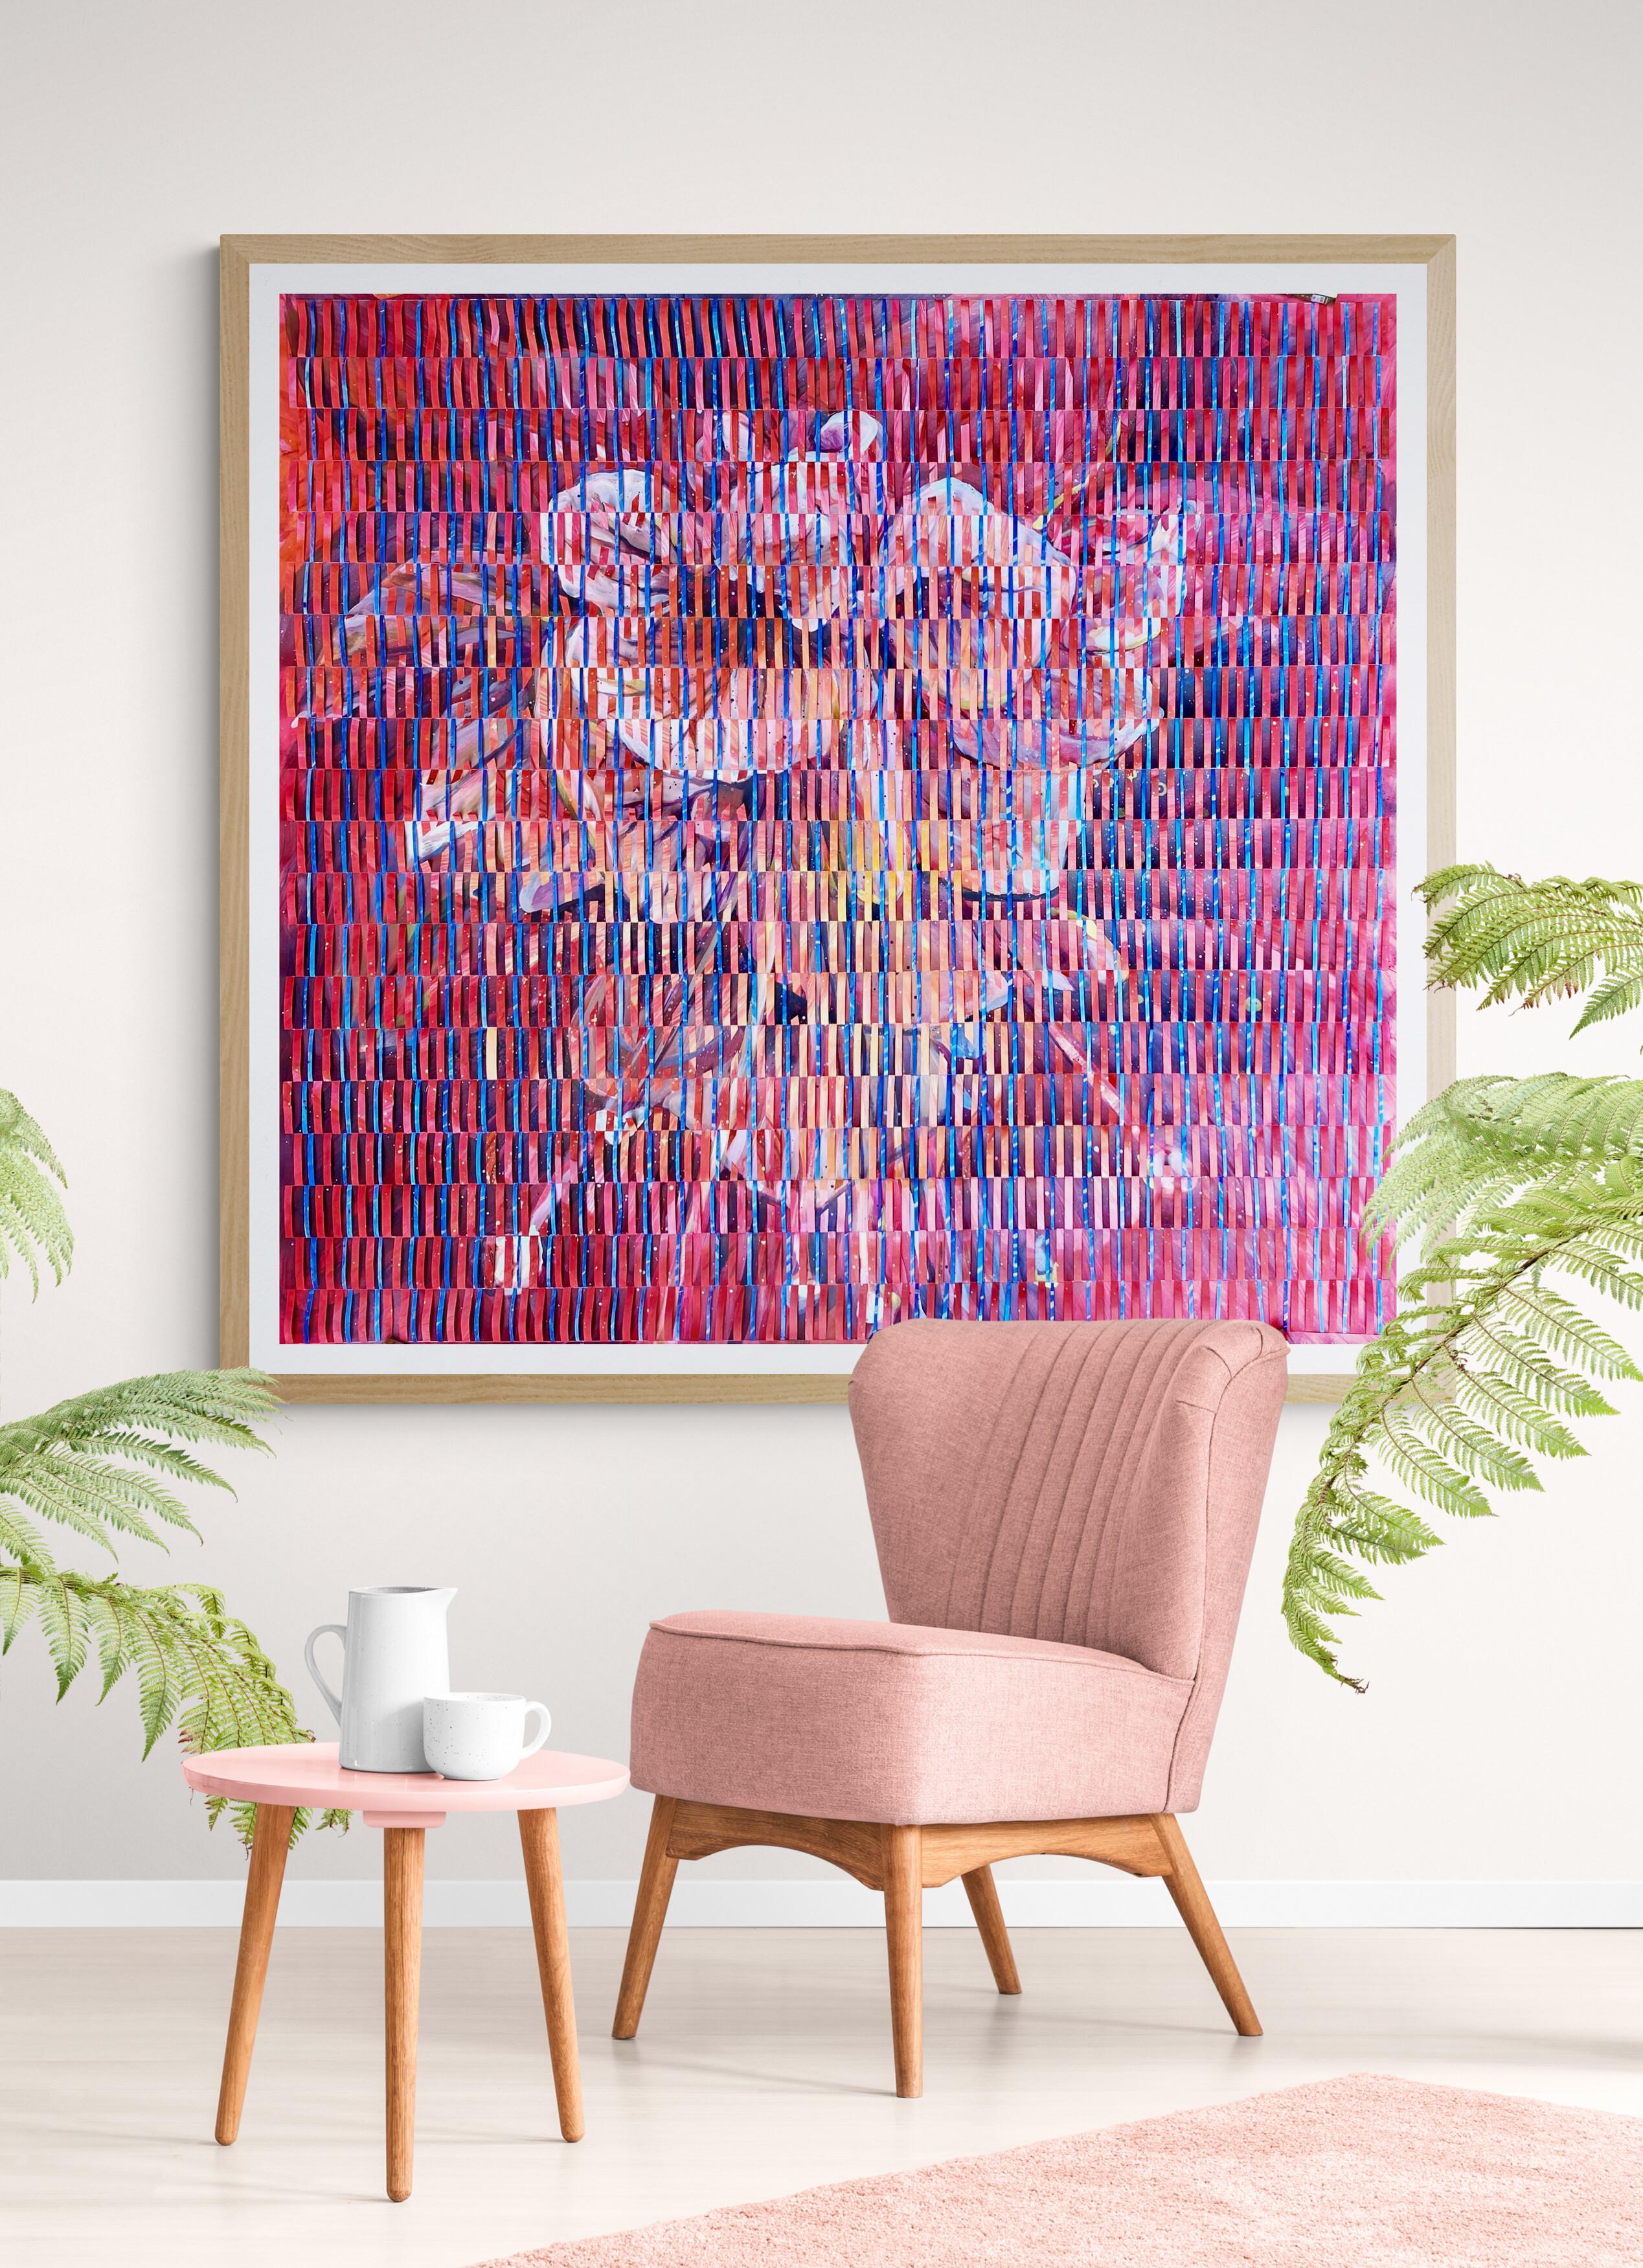 Large Pink Mixed Media on Woven Fabriano Painting 